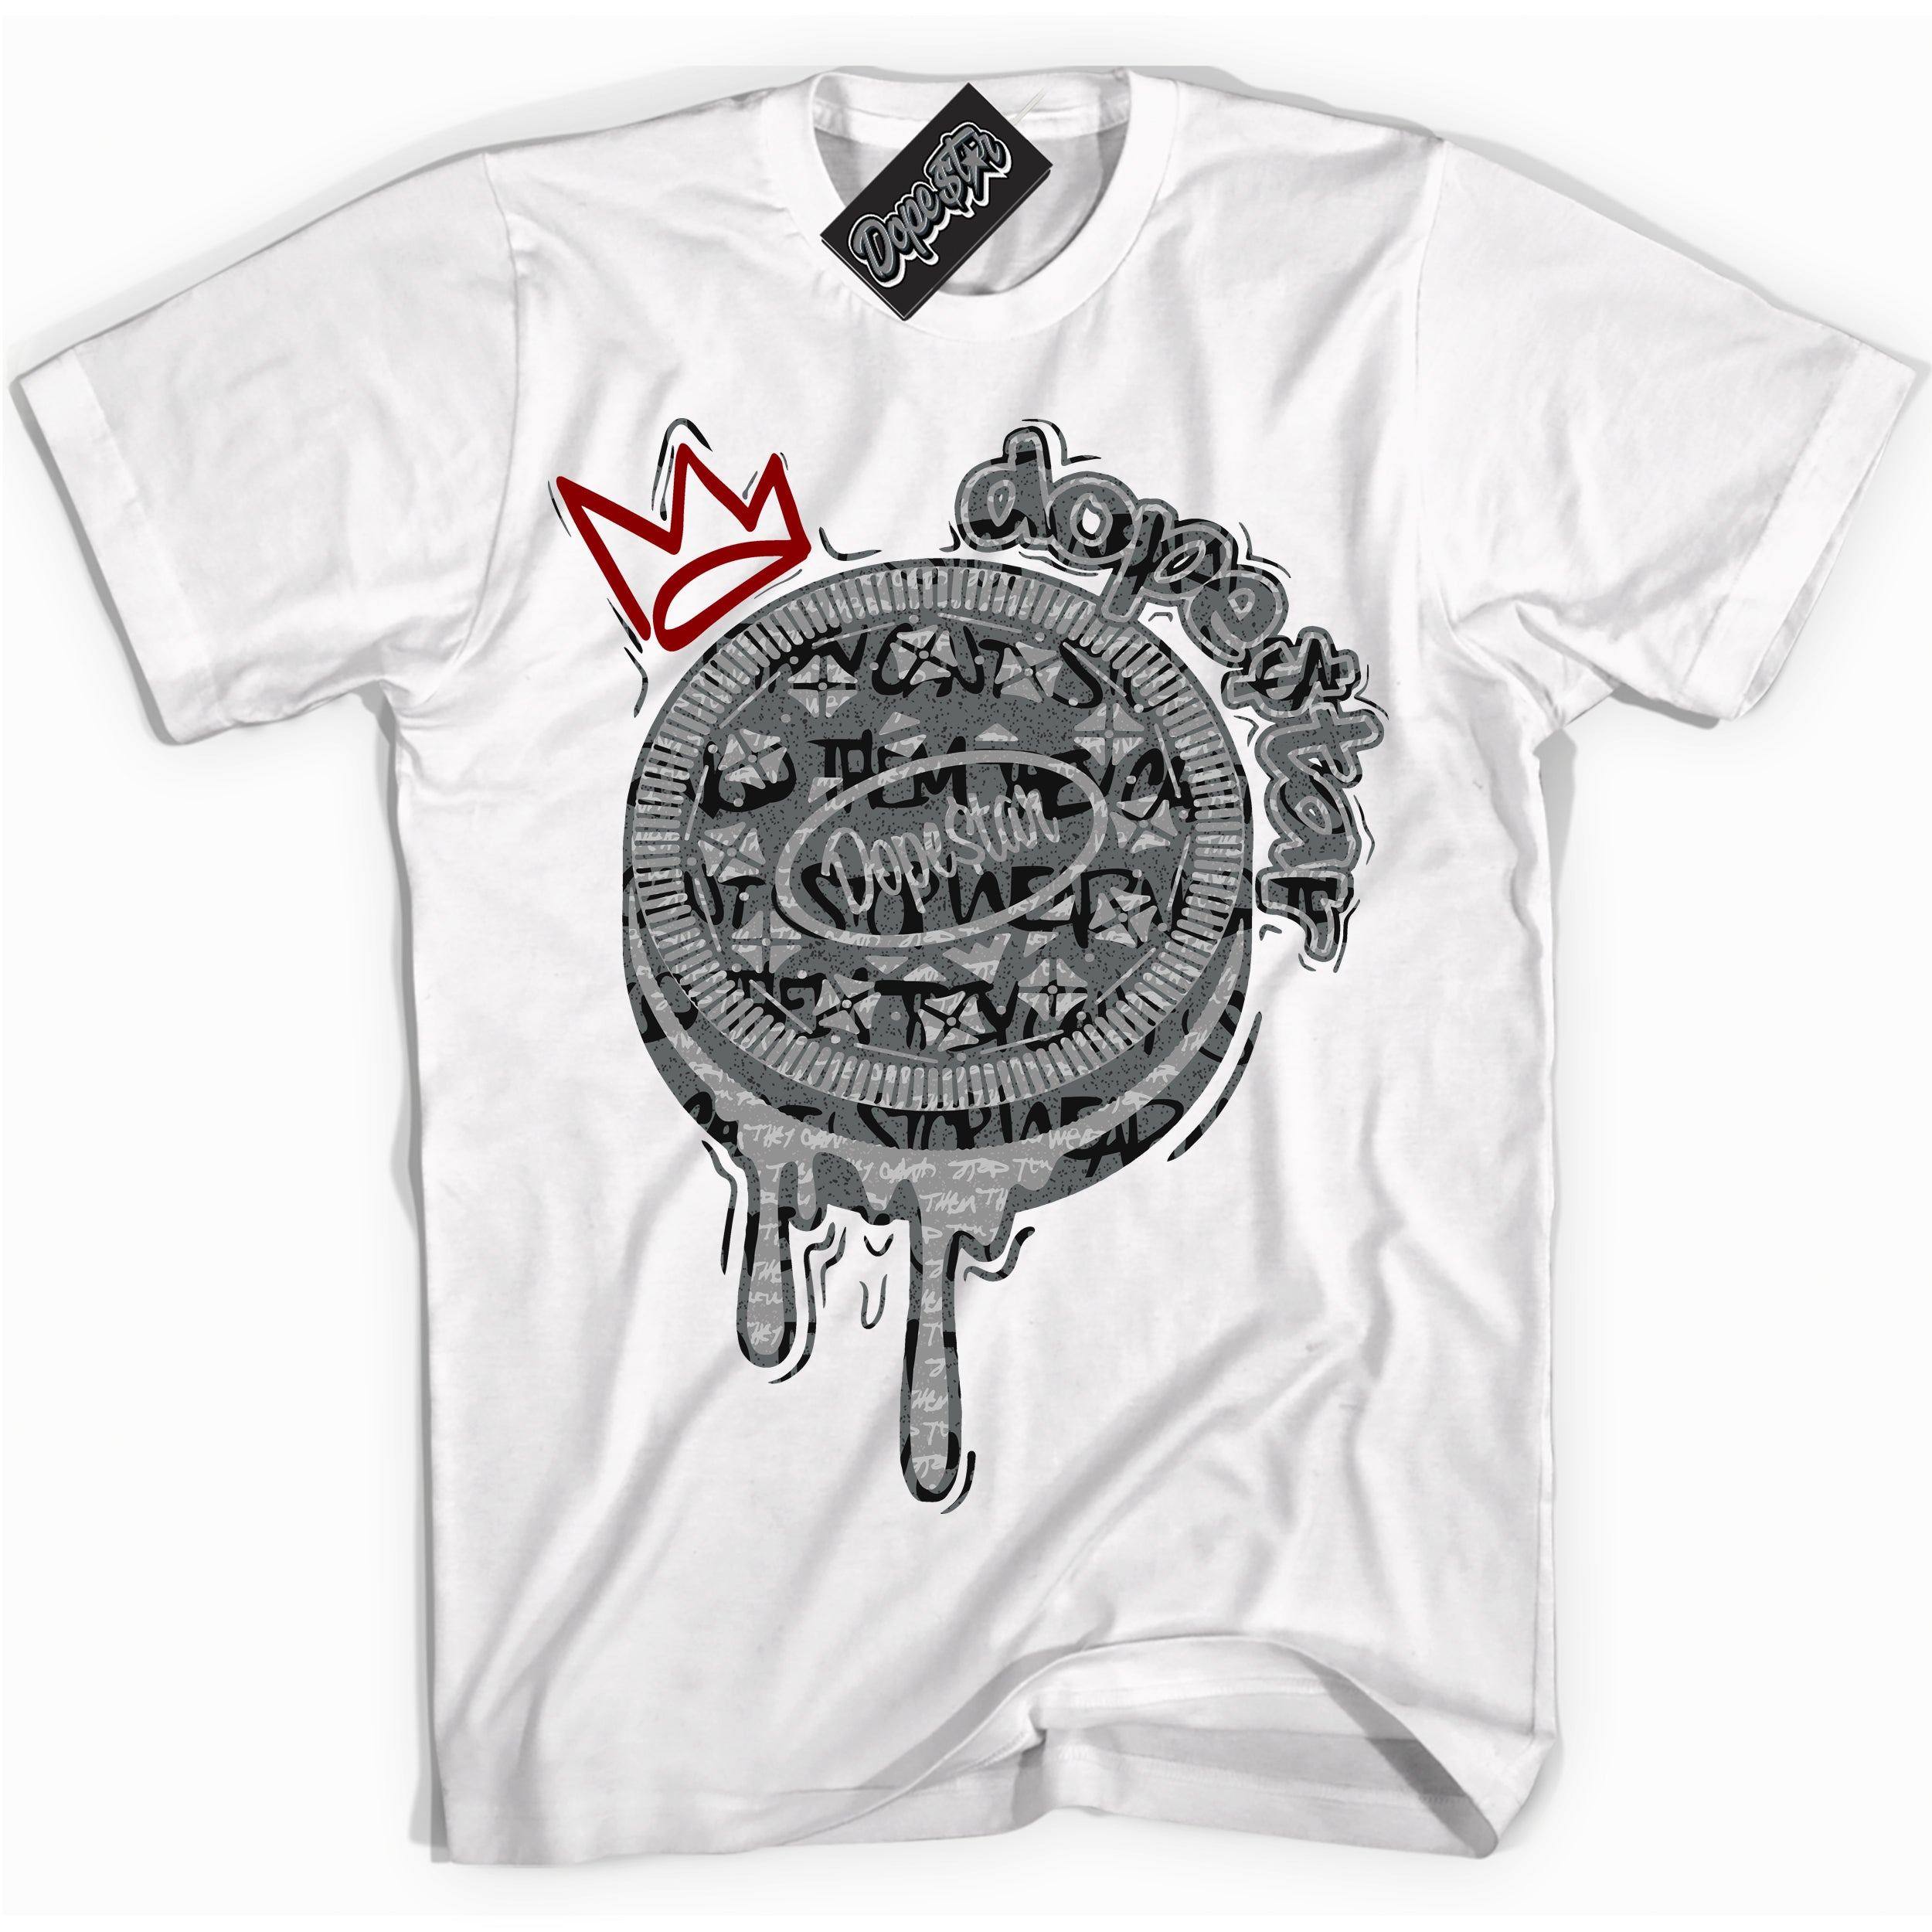 Cool White Shirt with “ Oreo DS ” design that perfectly matches Rebellionaire 1s Sneakers.